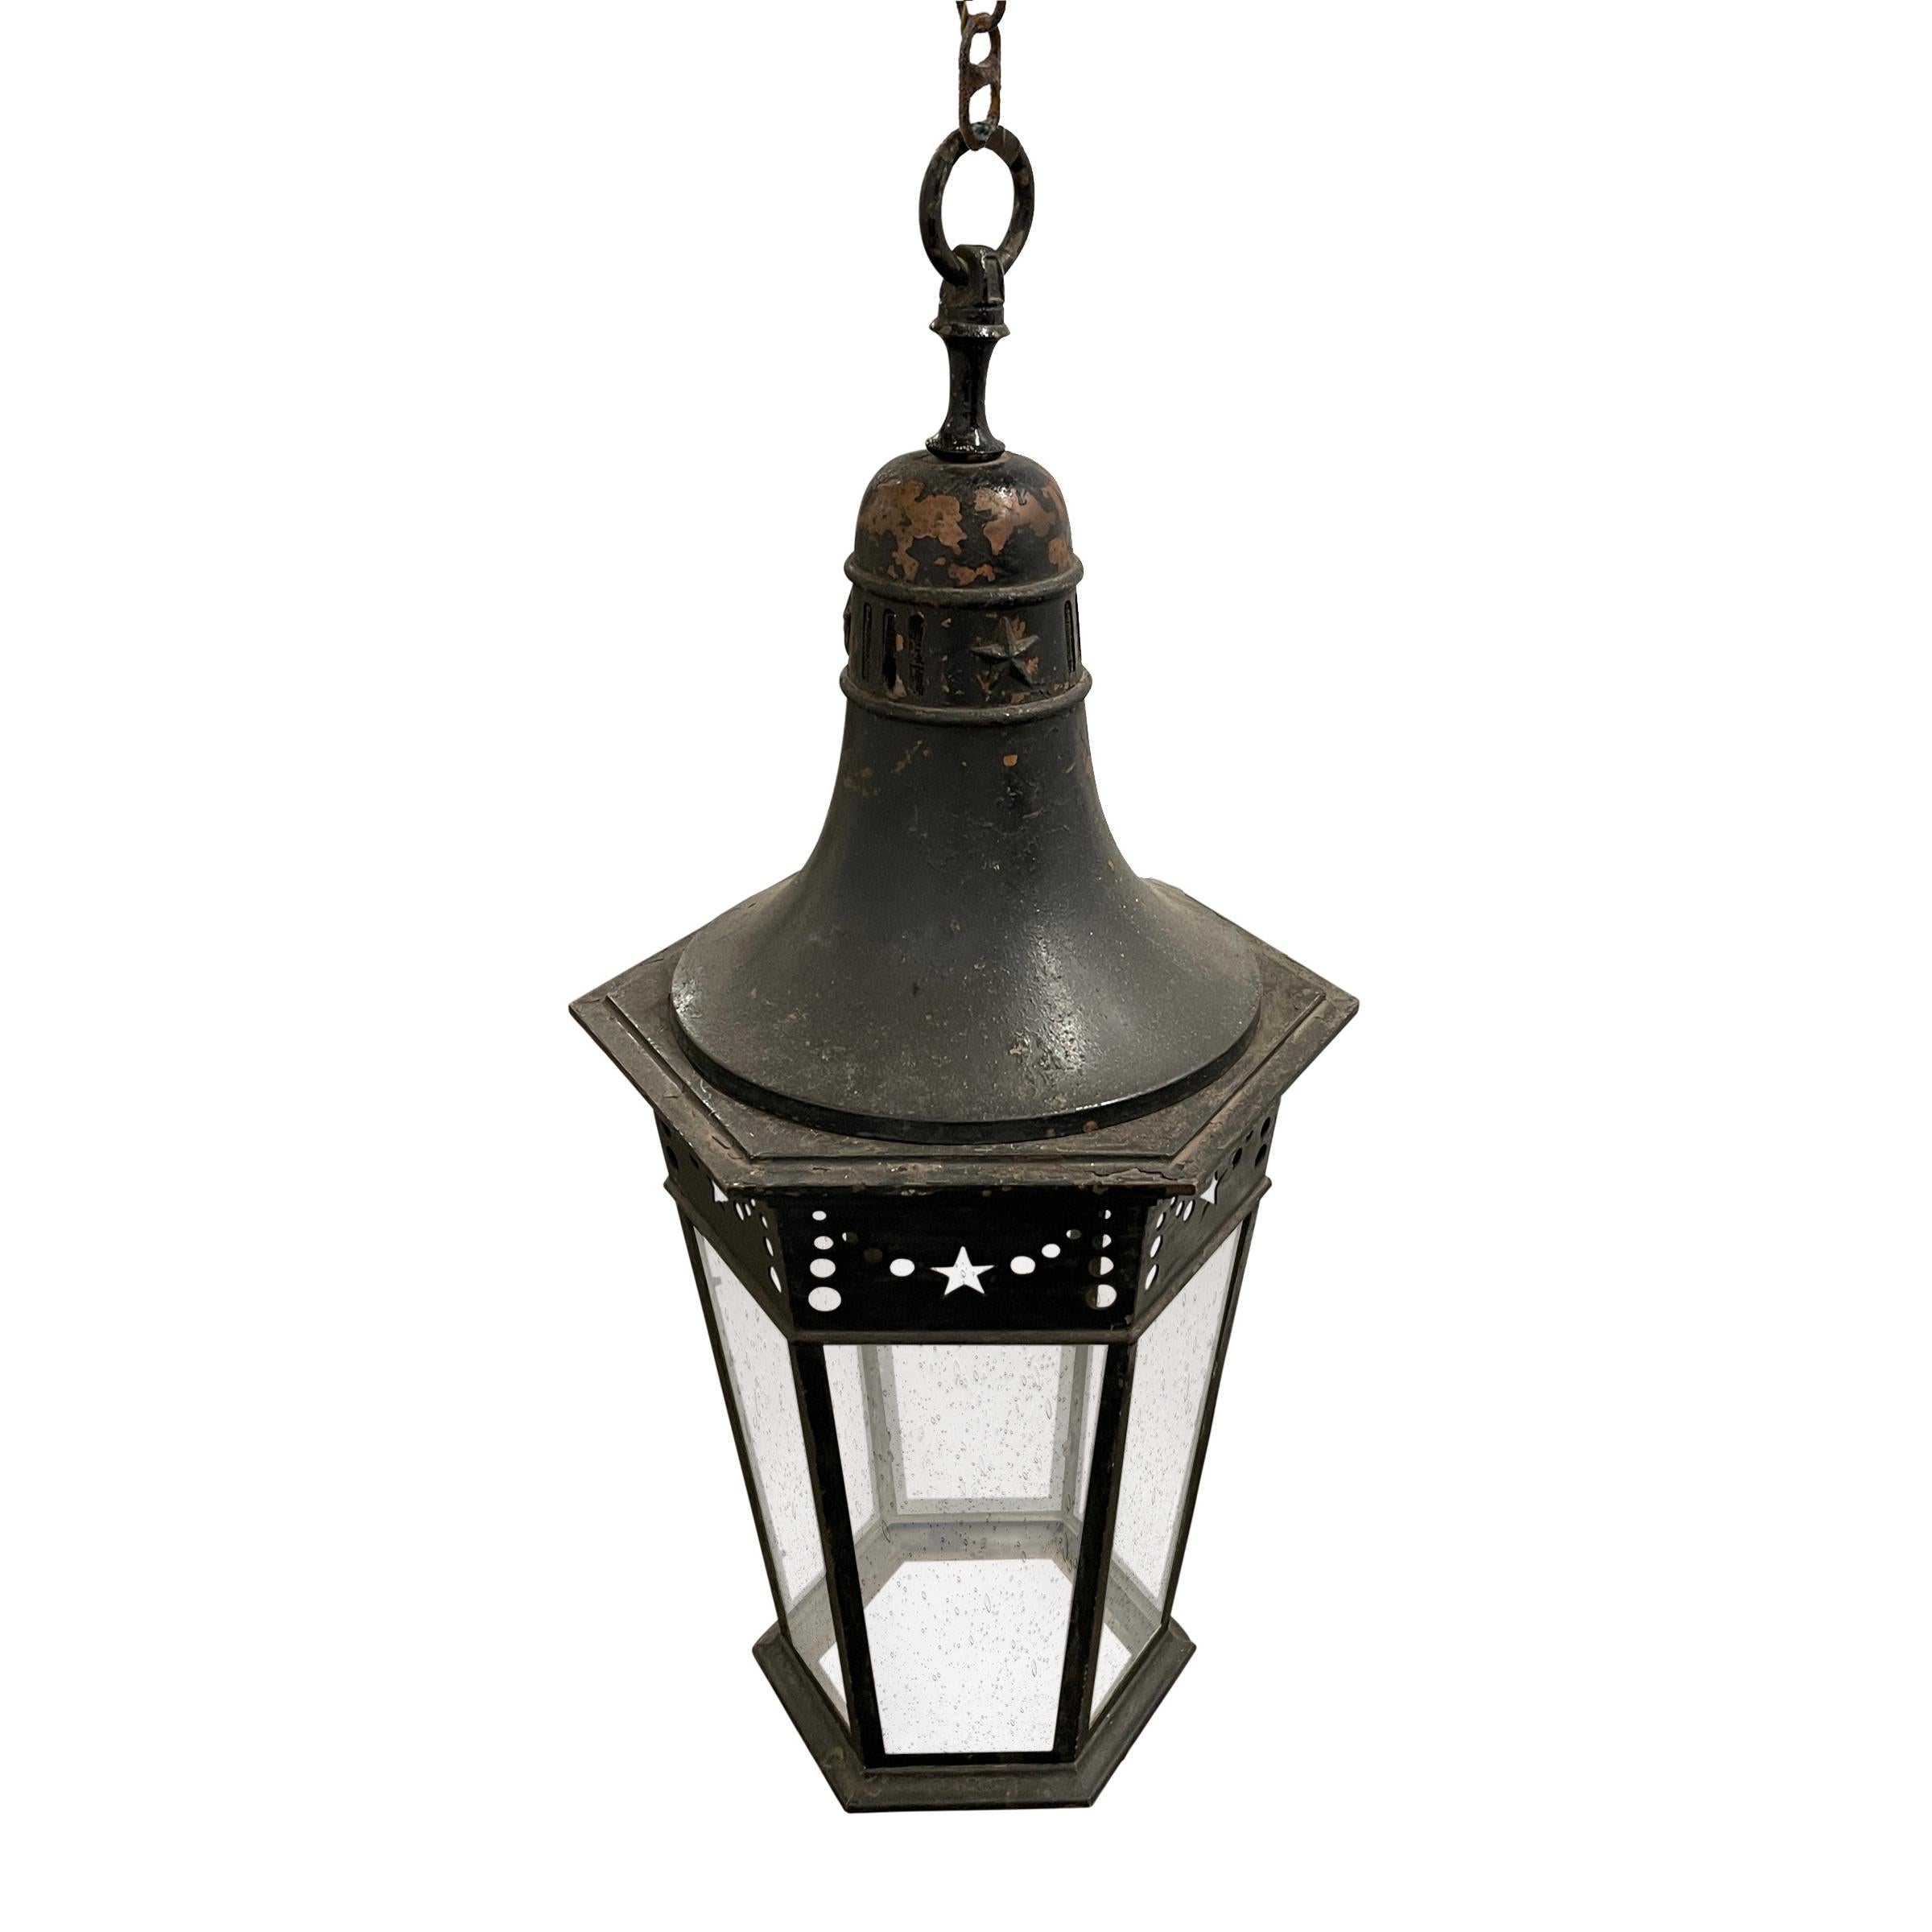 Neoclassical Revival 19th Century French Lantern For Sale